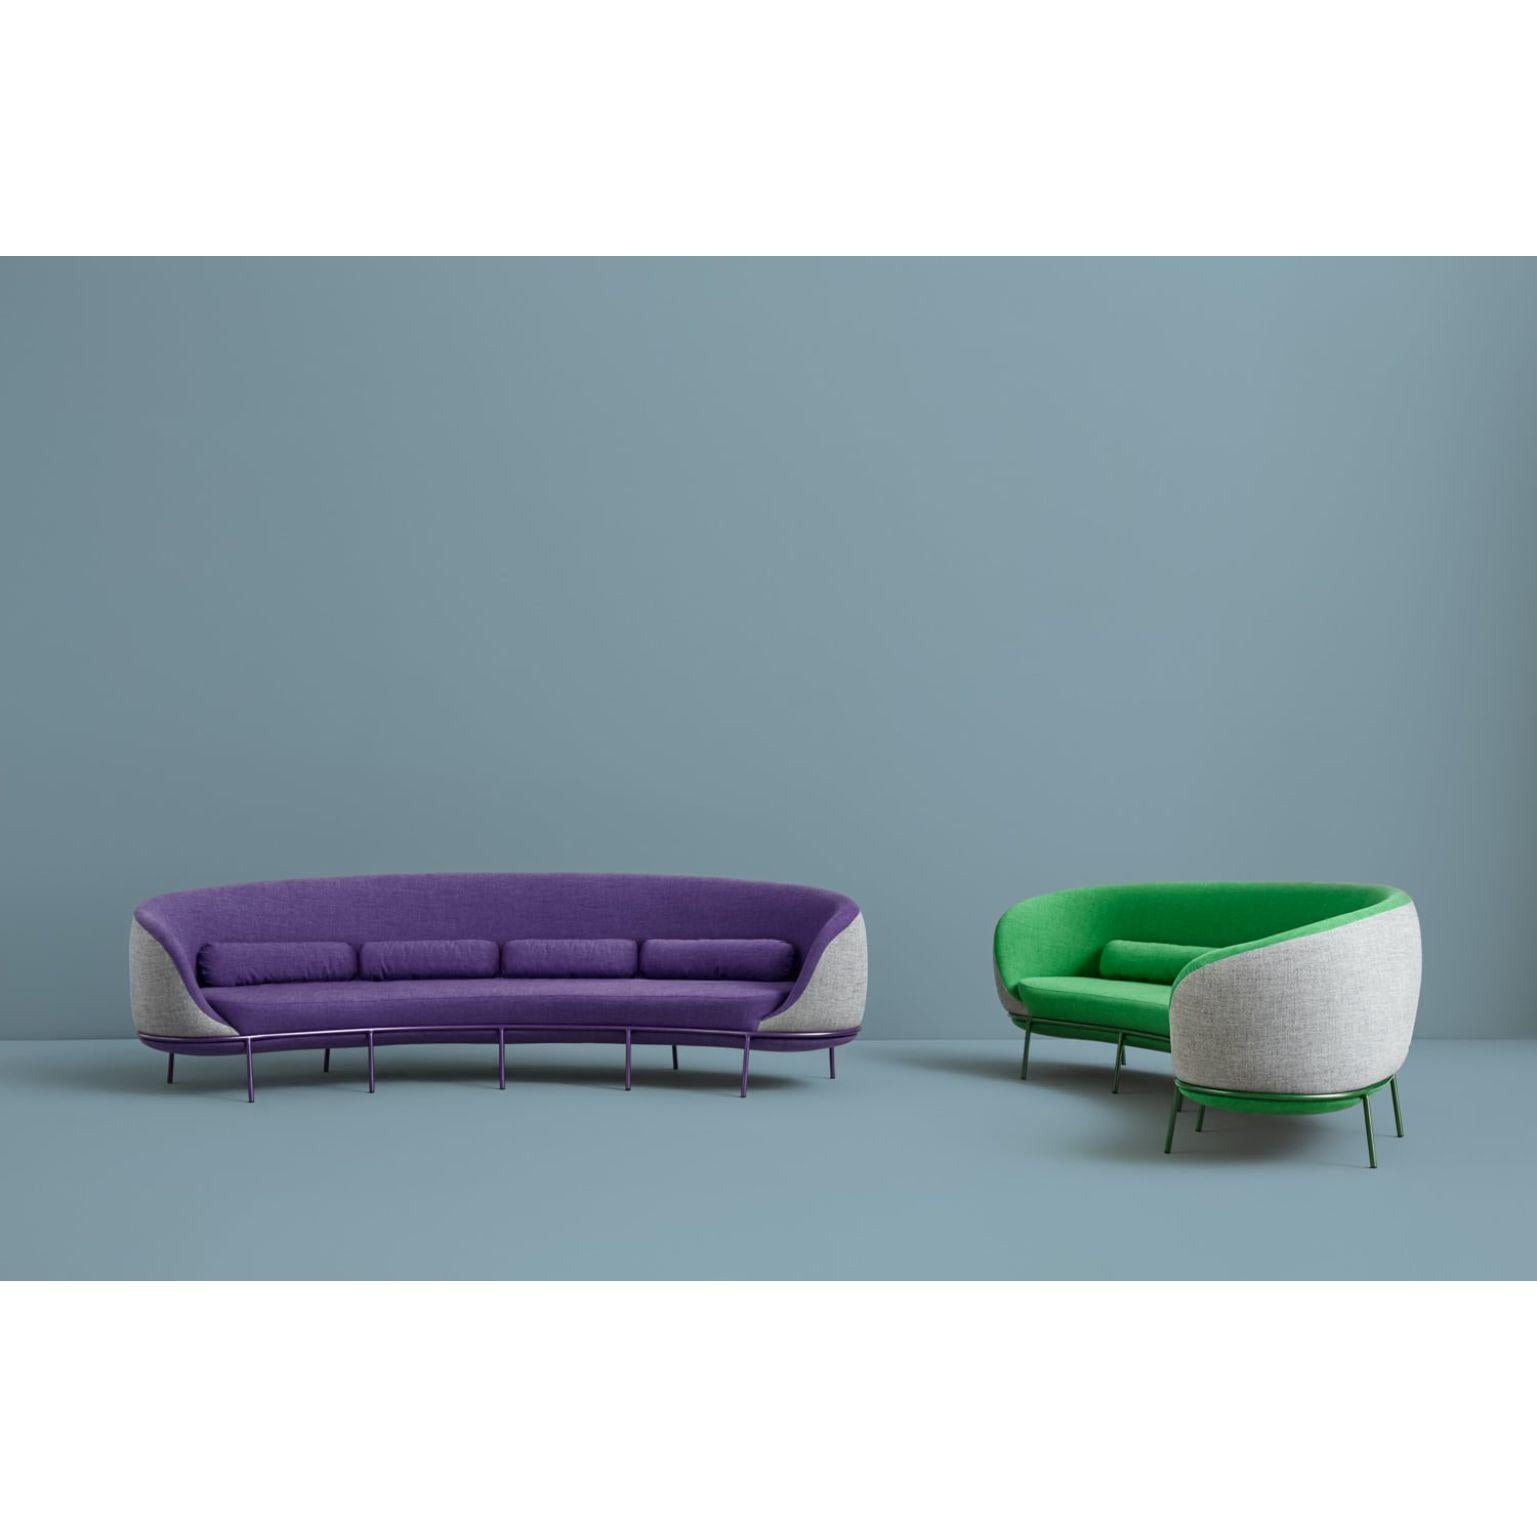 Set of Purple and Green Nest Sofa by Pepe Albargues
Dimensions: W 340, D 110, H 80, Seat 41
Materials: Iron structure and MDF board
Foam CMHR (high resilience and flame retardant) for all our cushion filling systems
Painted or chromed legs
Stainless